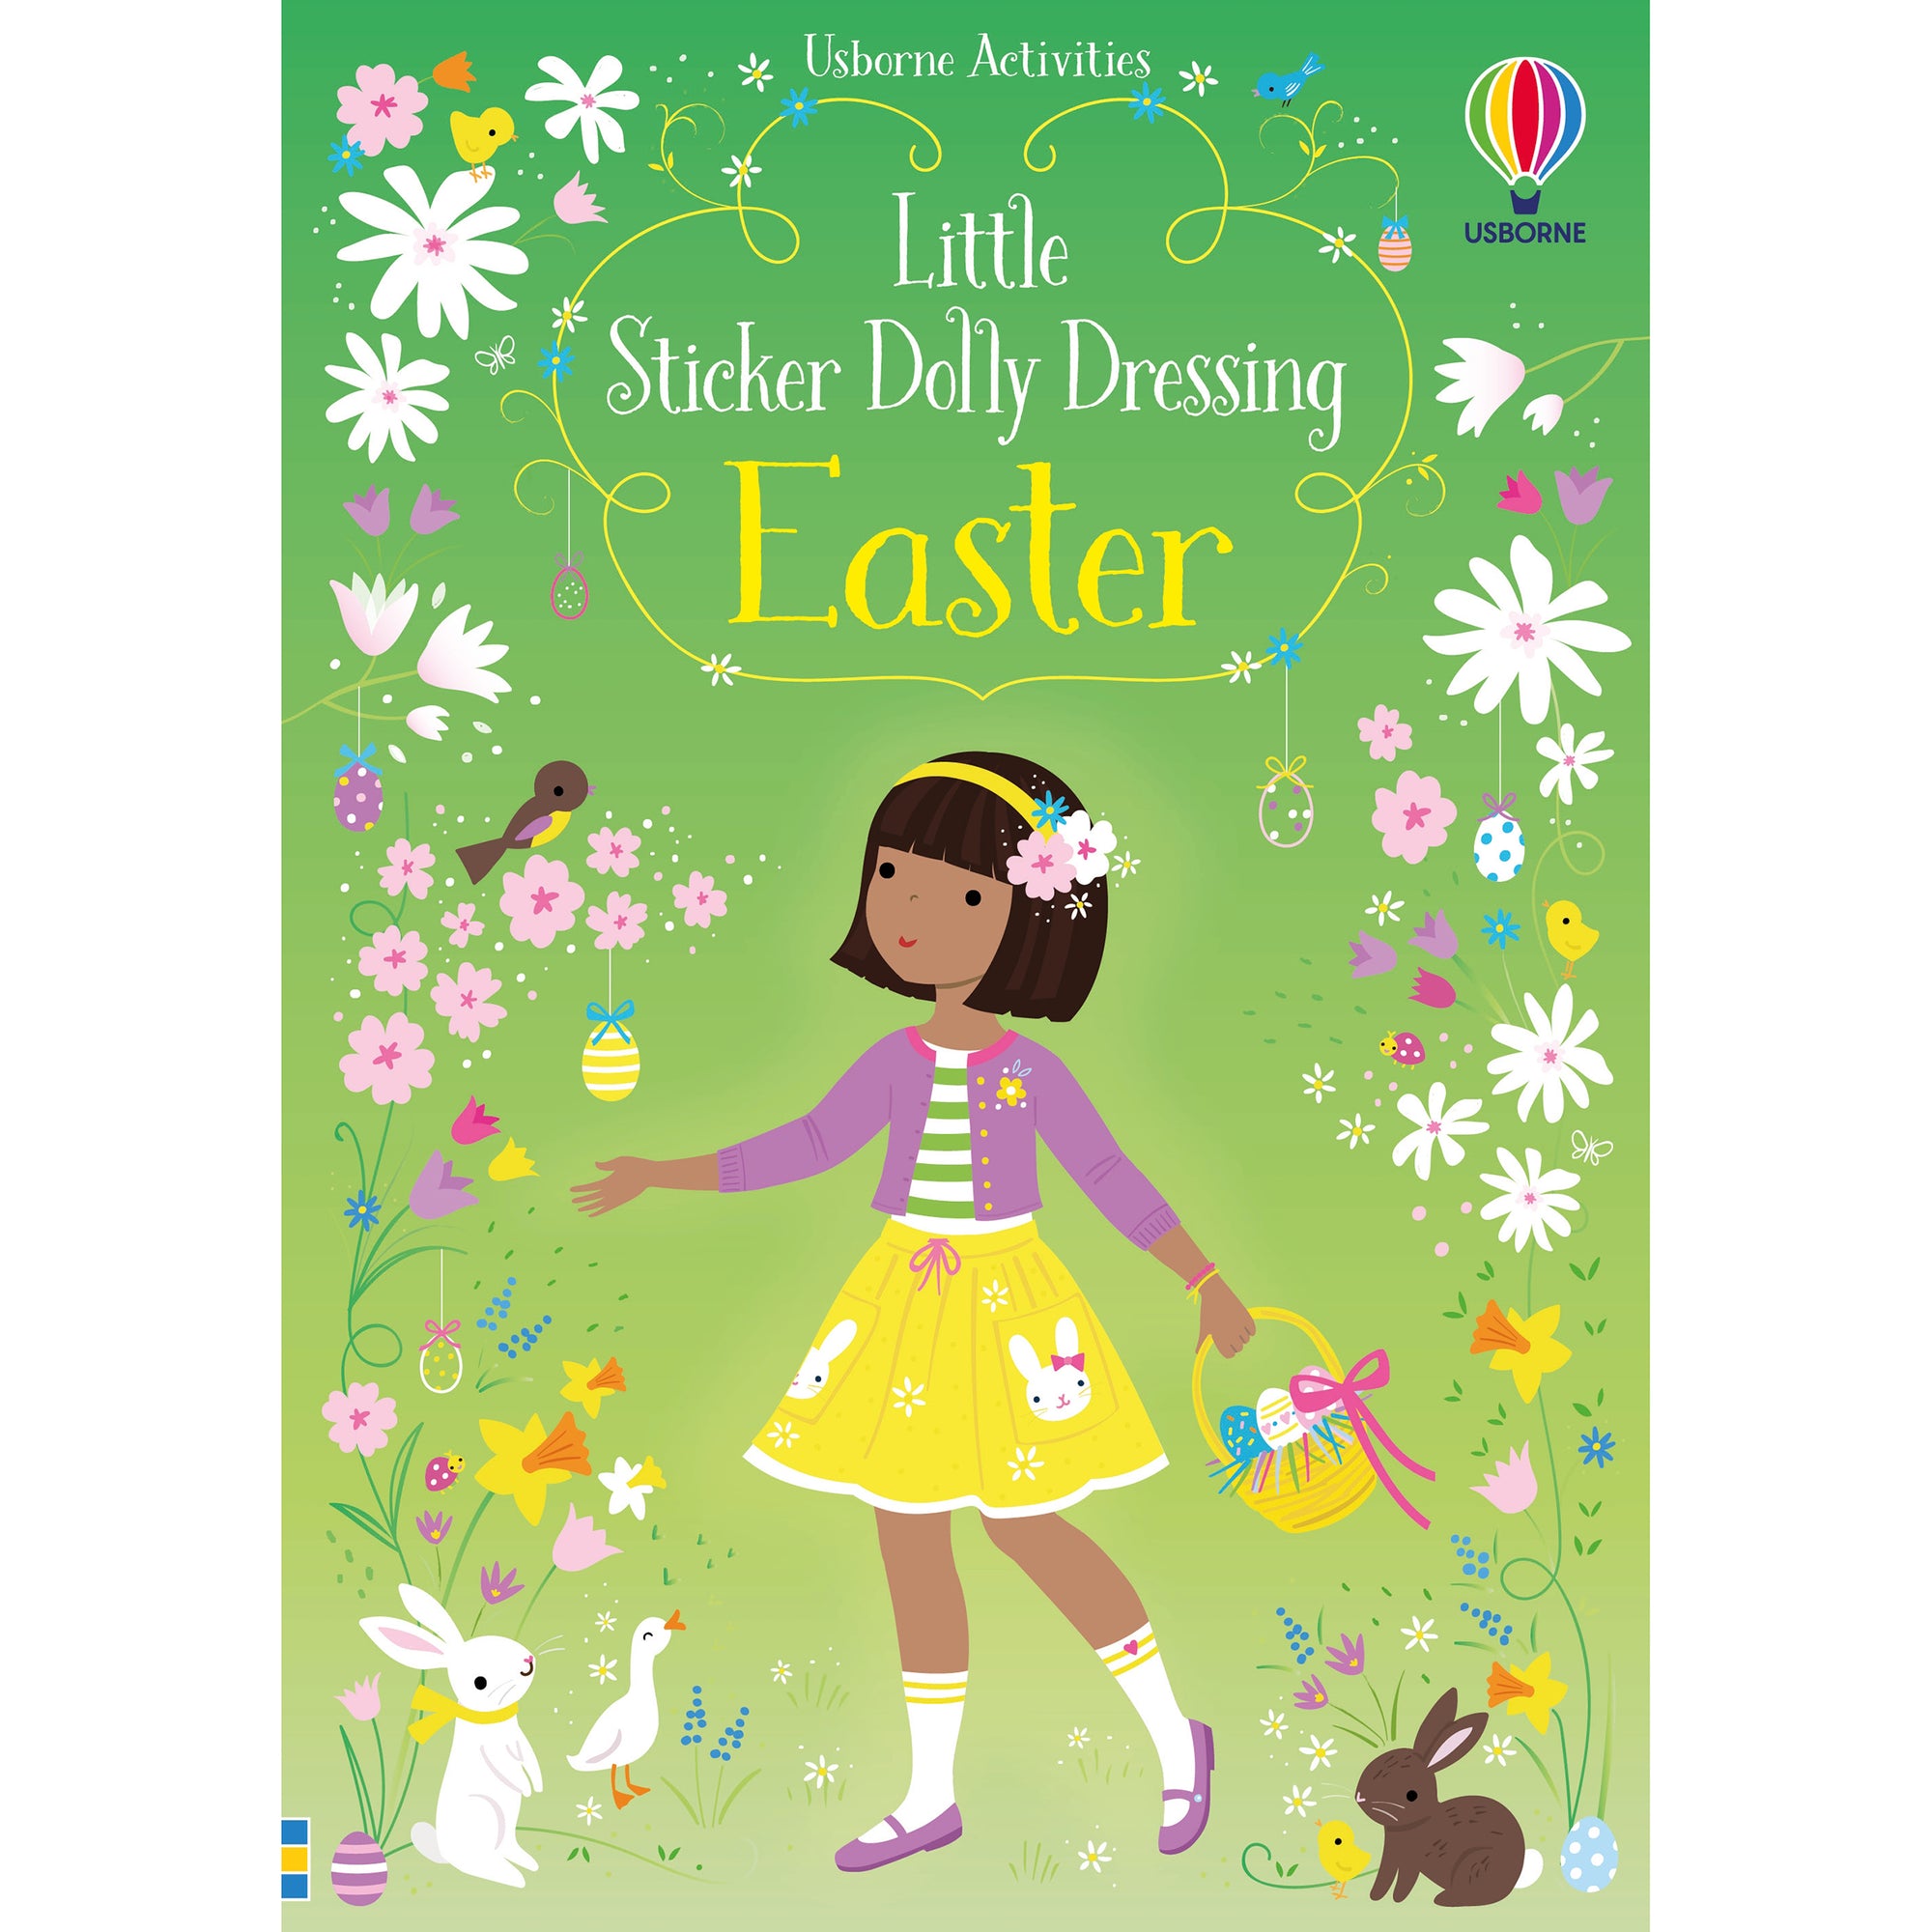 Little Sticker Dolly Dressing Easter Activity Book